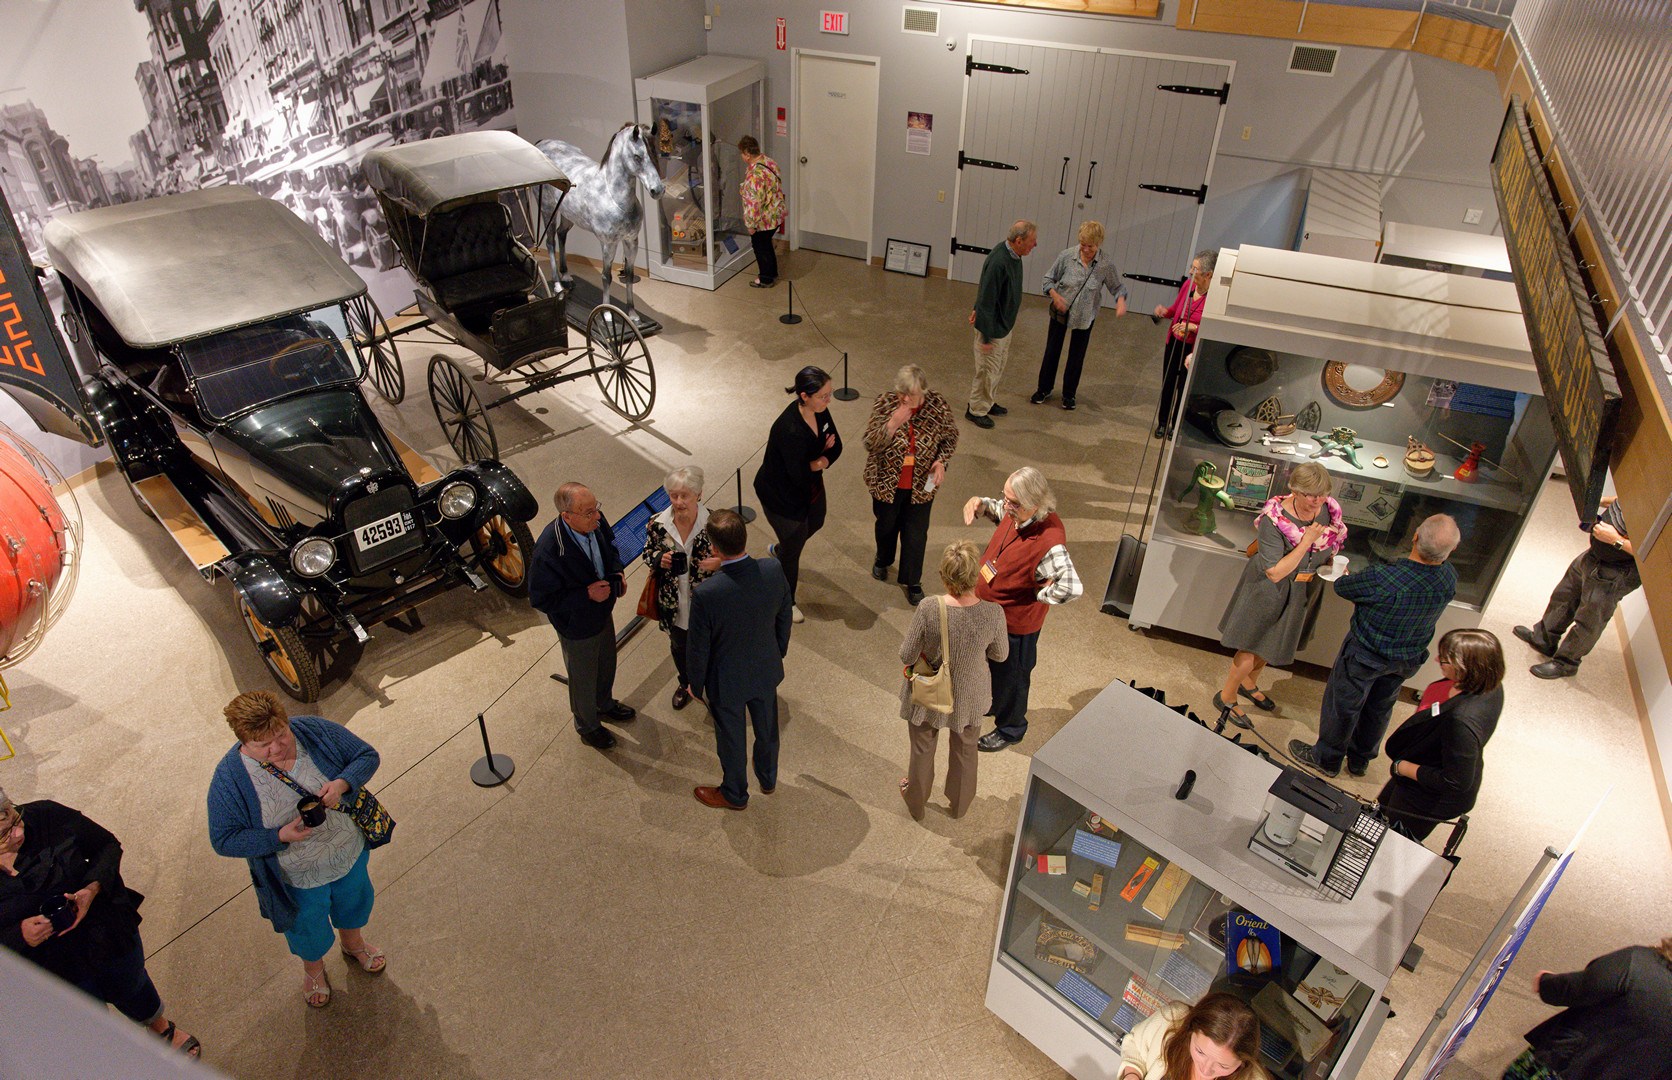 Group gathered in large museum gallery.